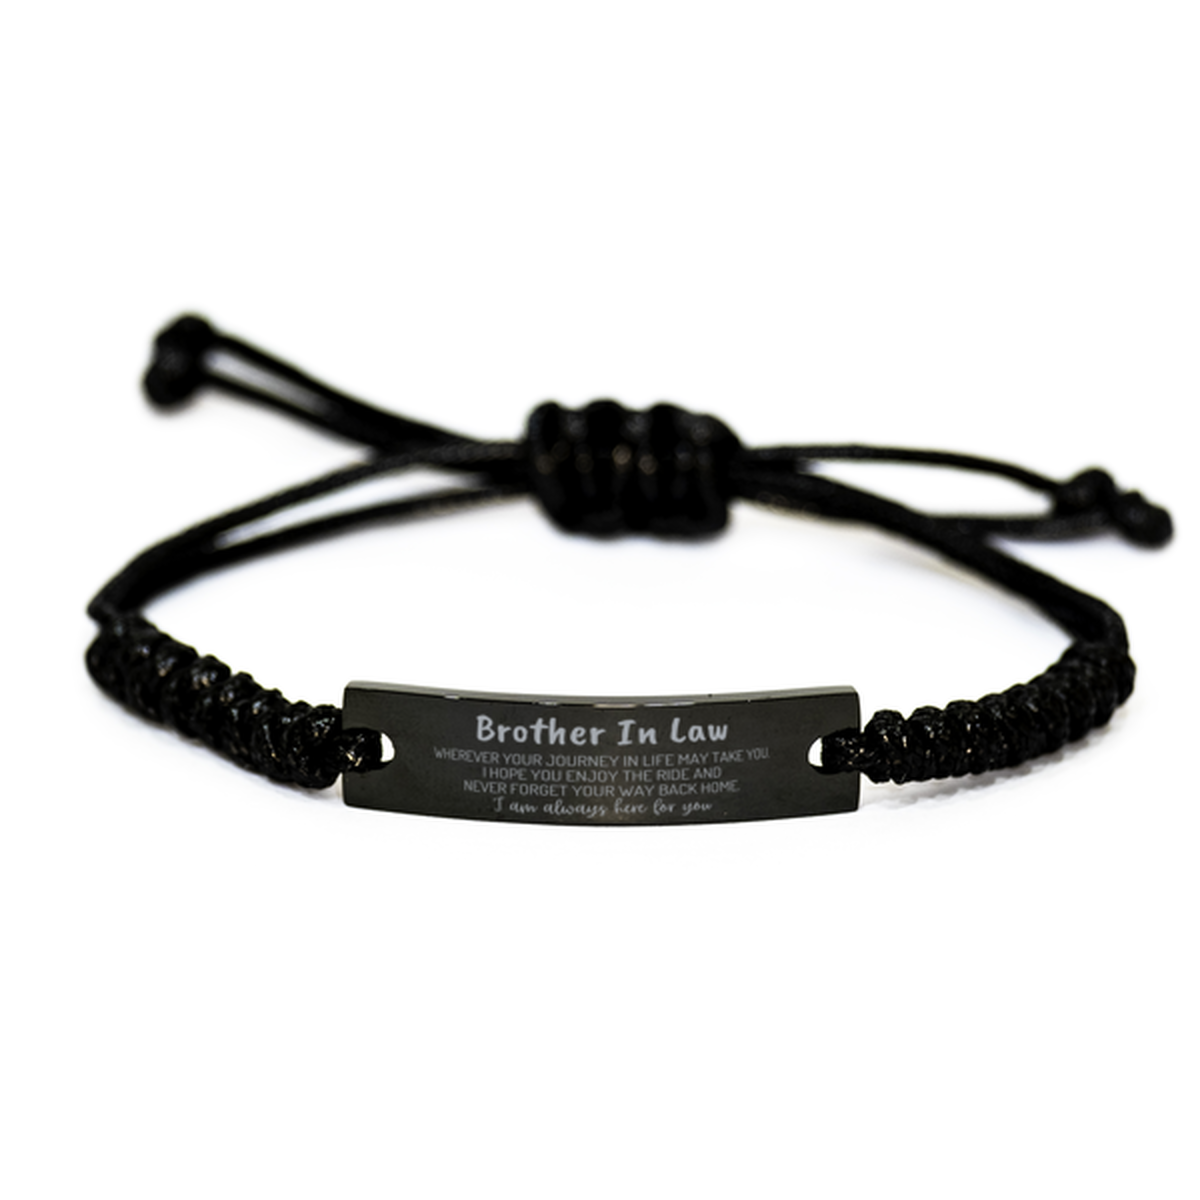 Brother In Law wherever your journey in life may take you, I am always here for you Brother In Law Black Rope Bracelet, Awesome Christmas Gifts For Brother In Law, Brother In Law Birthday Gifts for Men Women Family Loved One